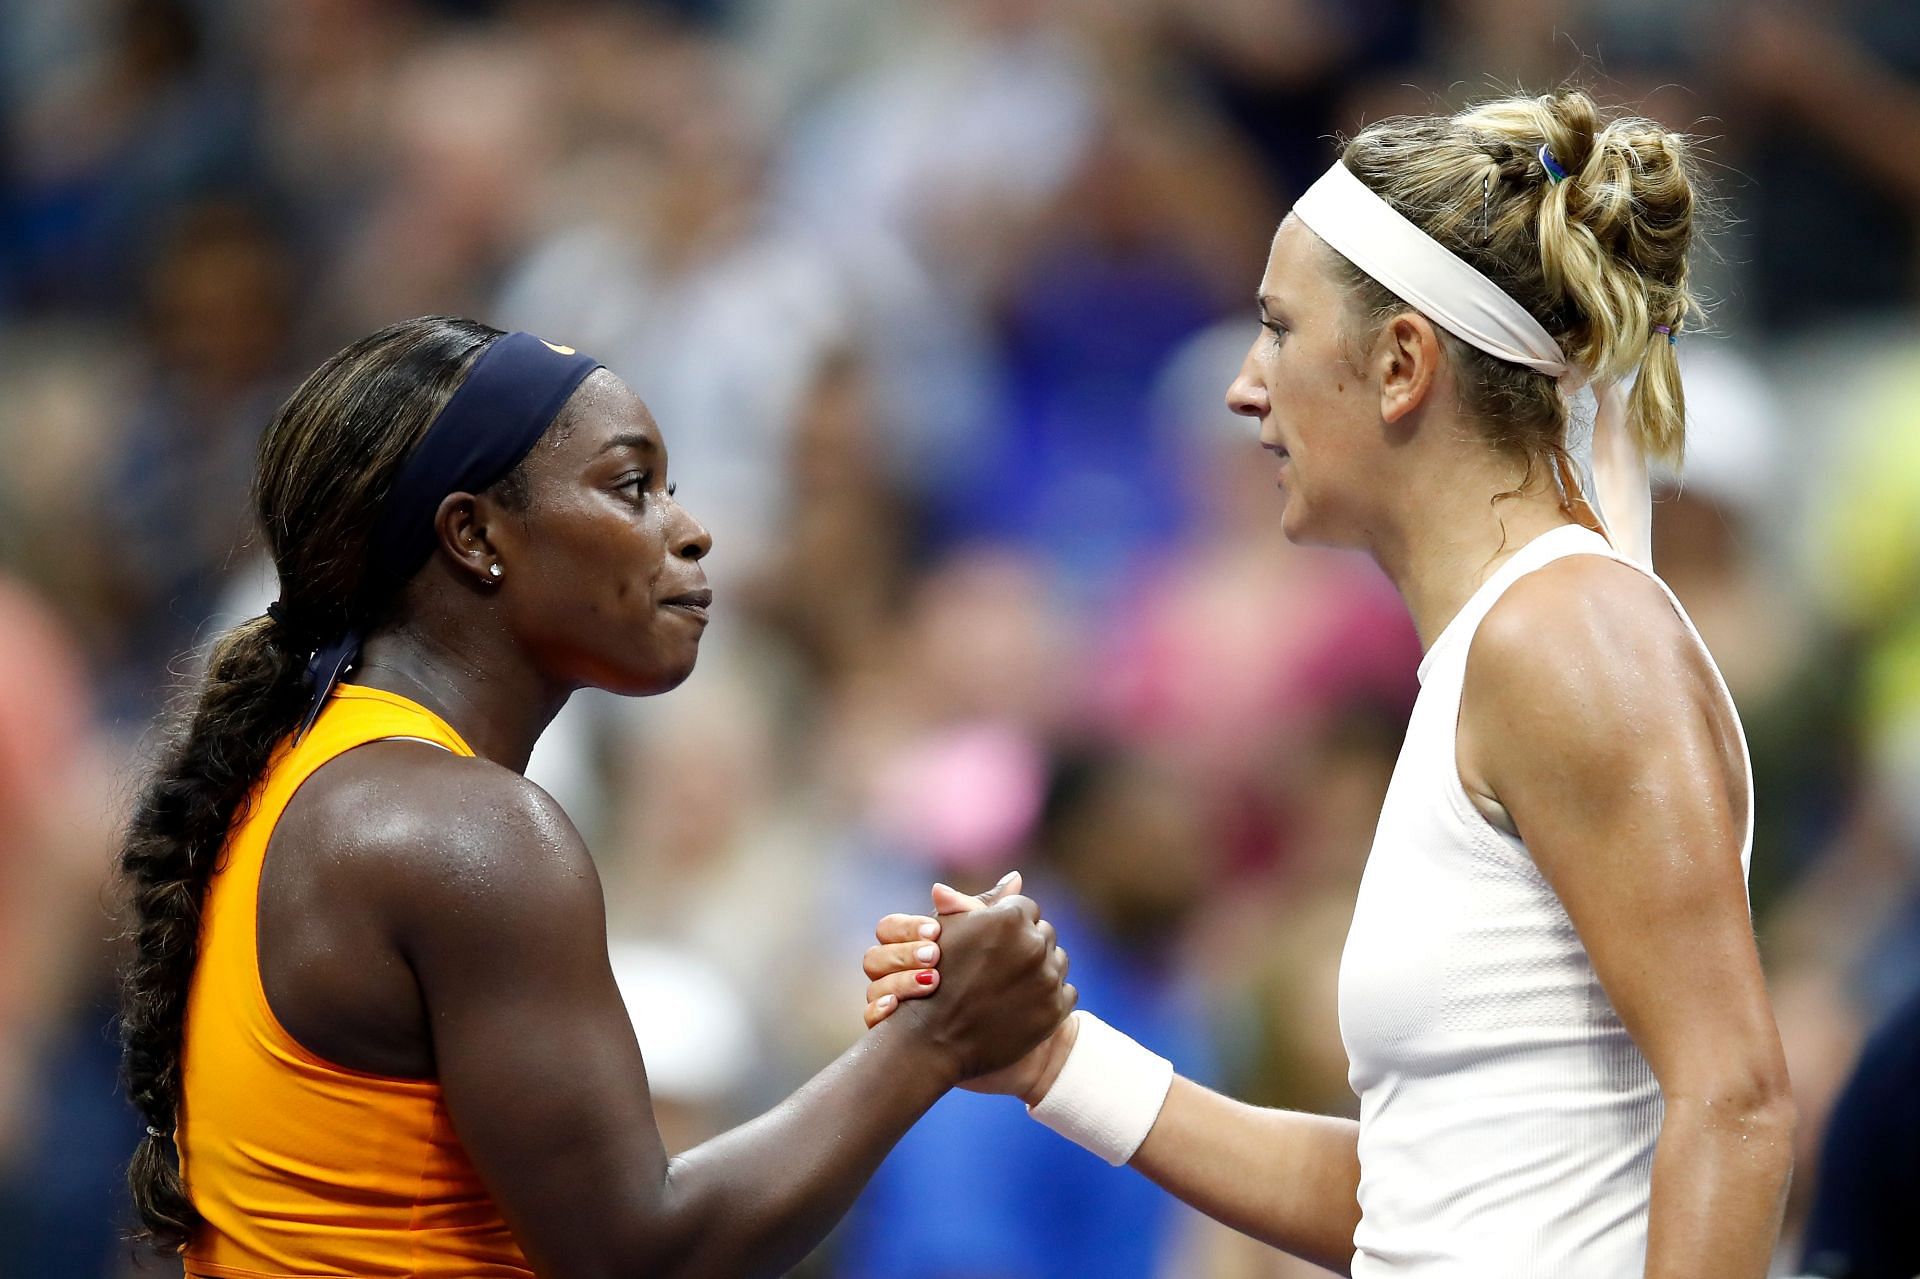 Sloane Stephens and Victoria Azarenka pictured at the 2018 US Open